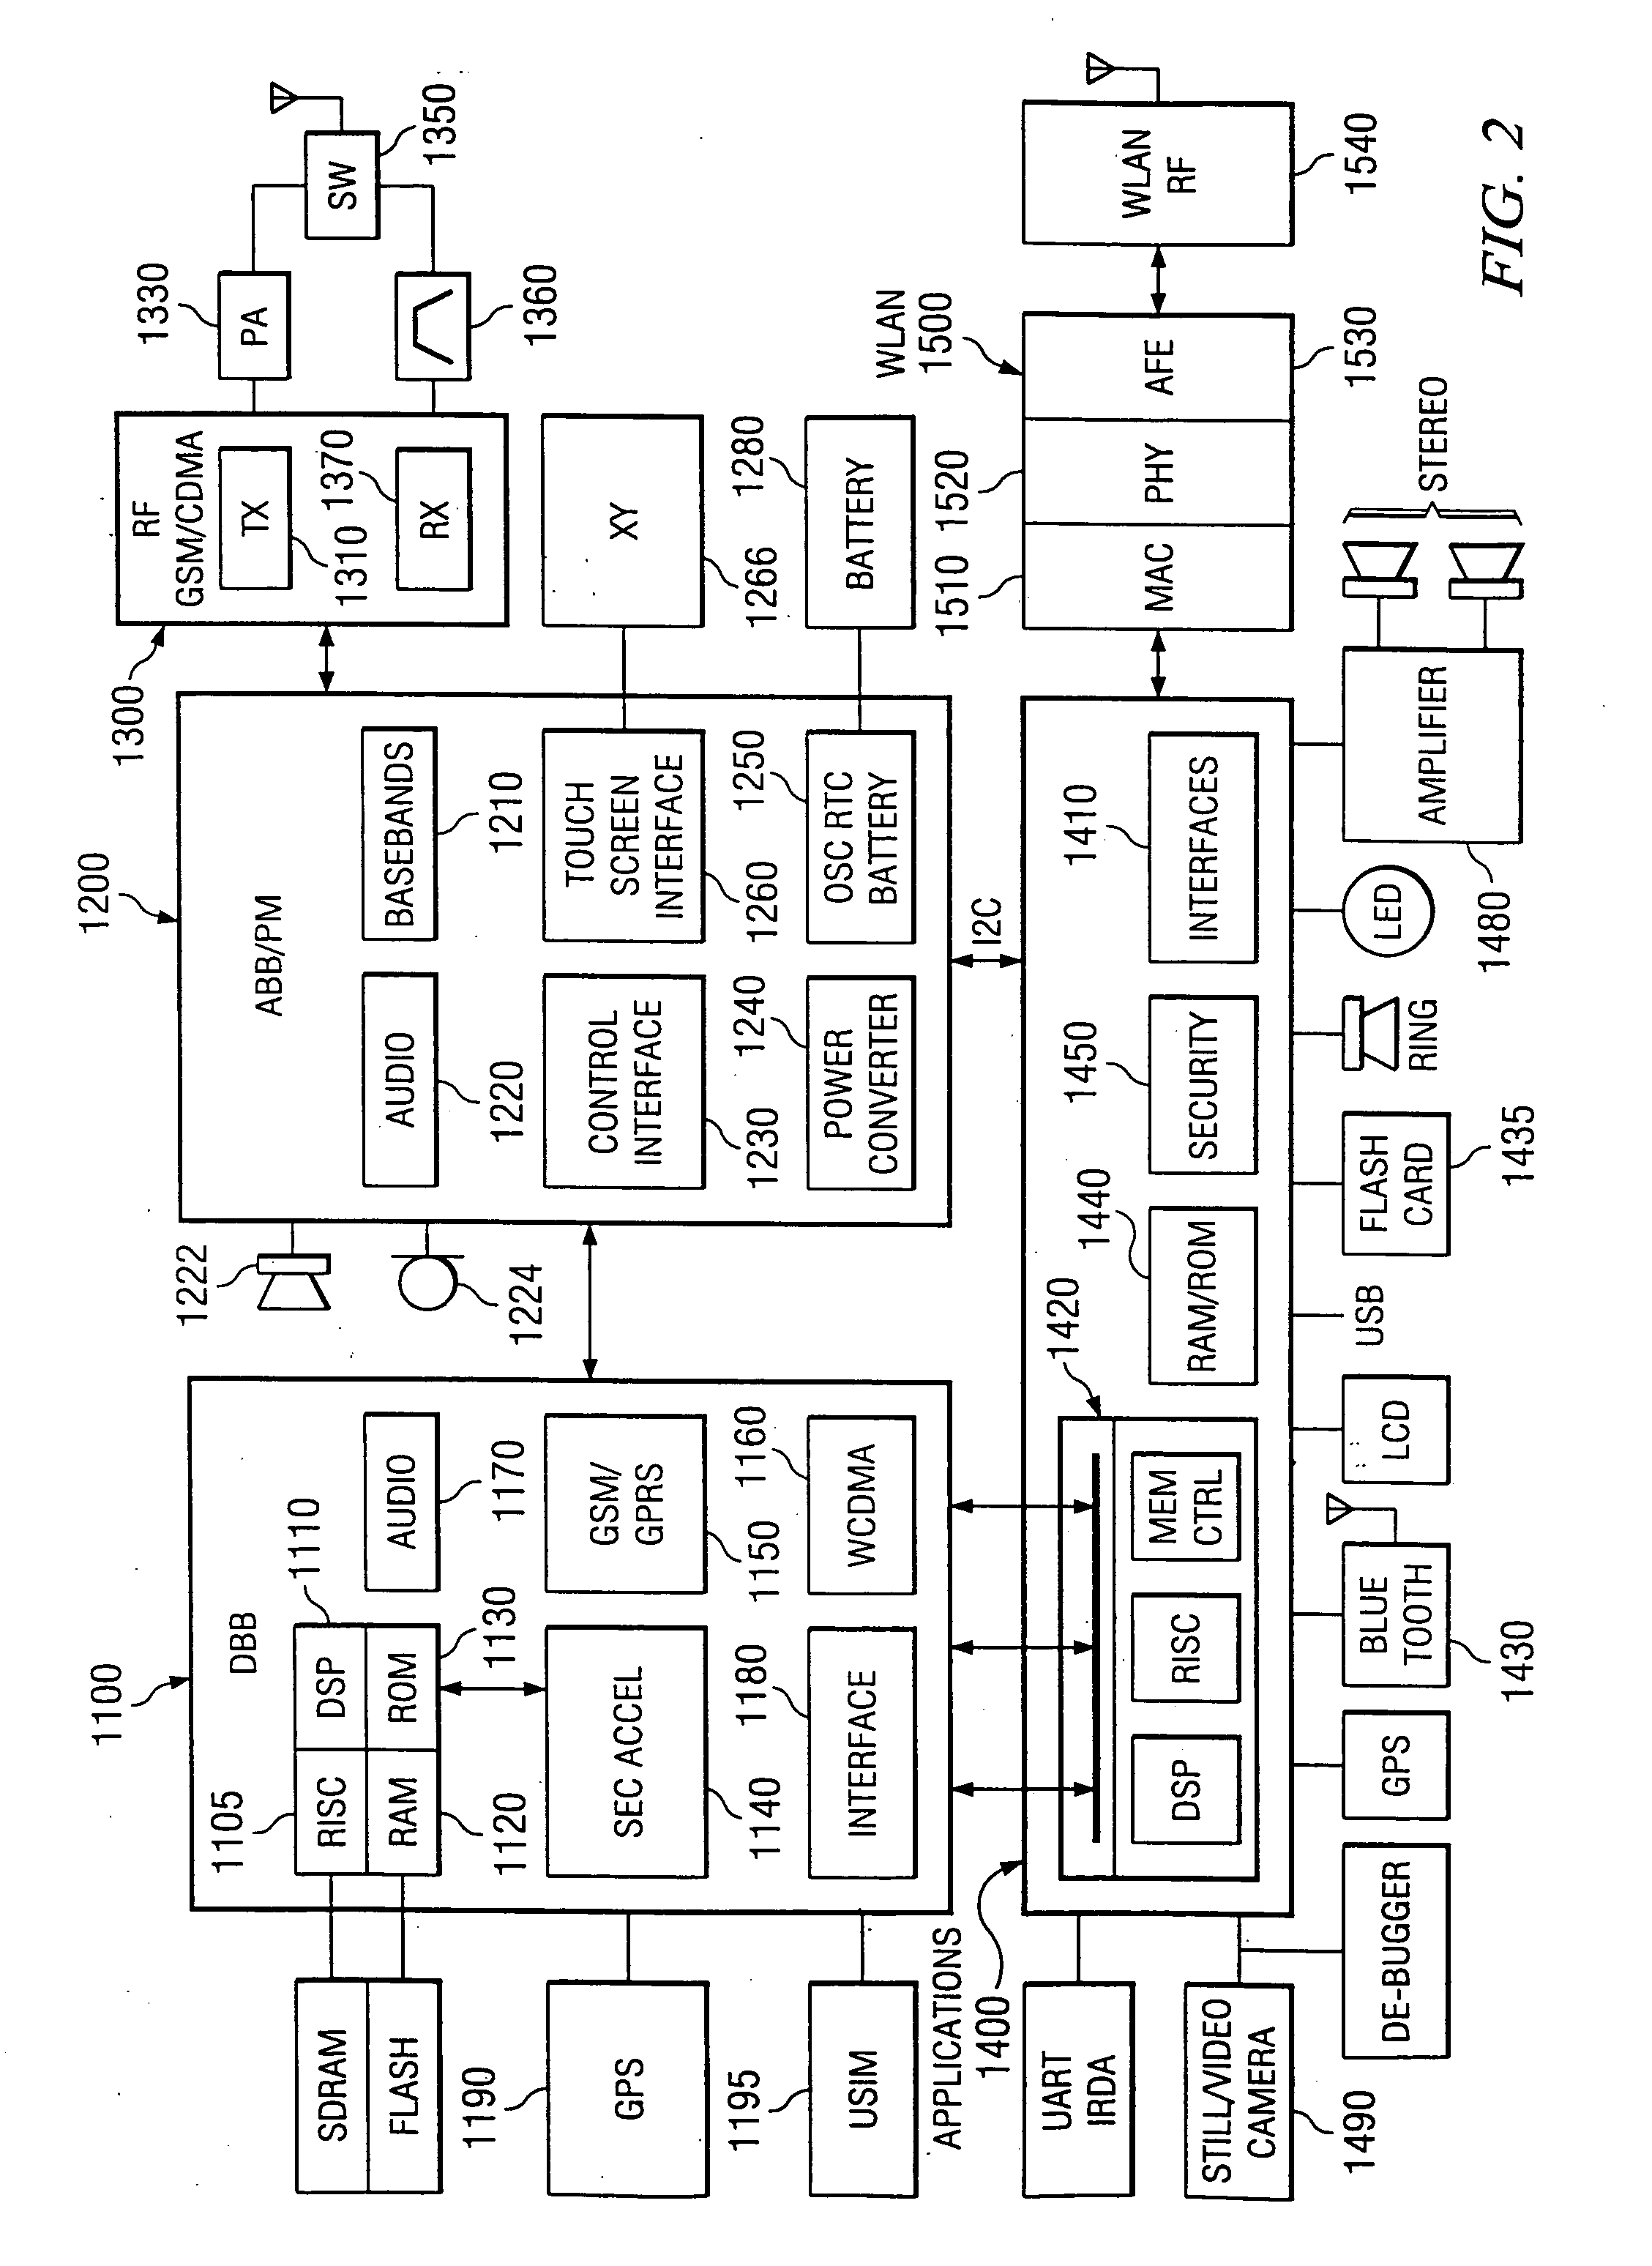 Processes, circuits, devices, and systems for branch prediction and other processor improvements